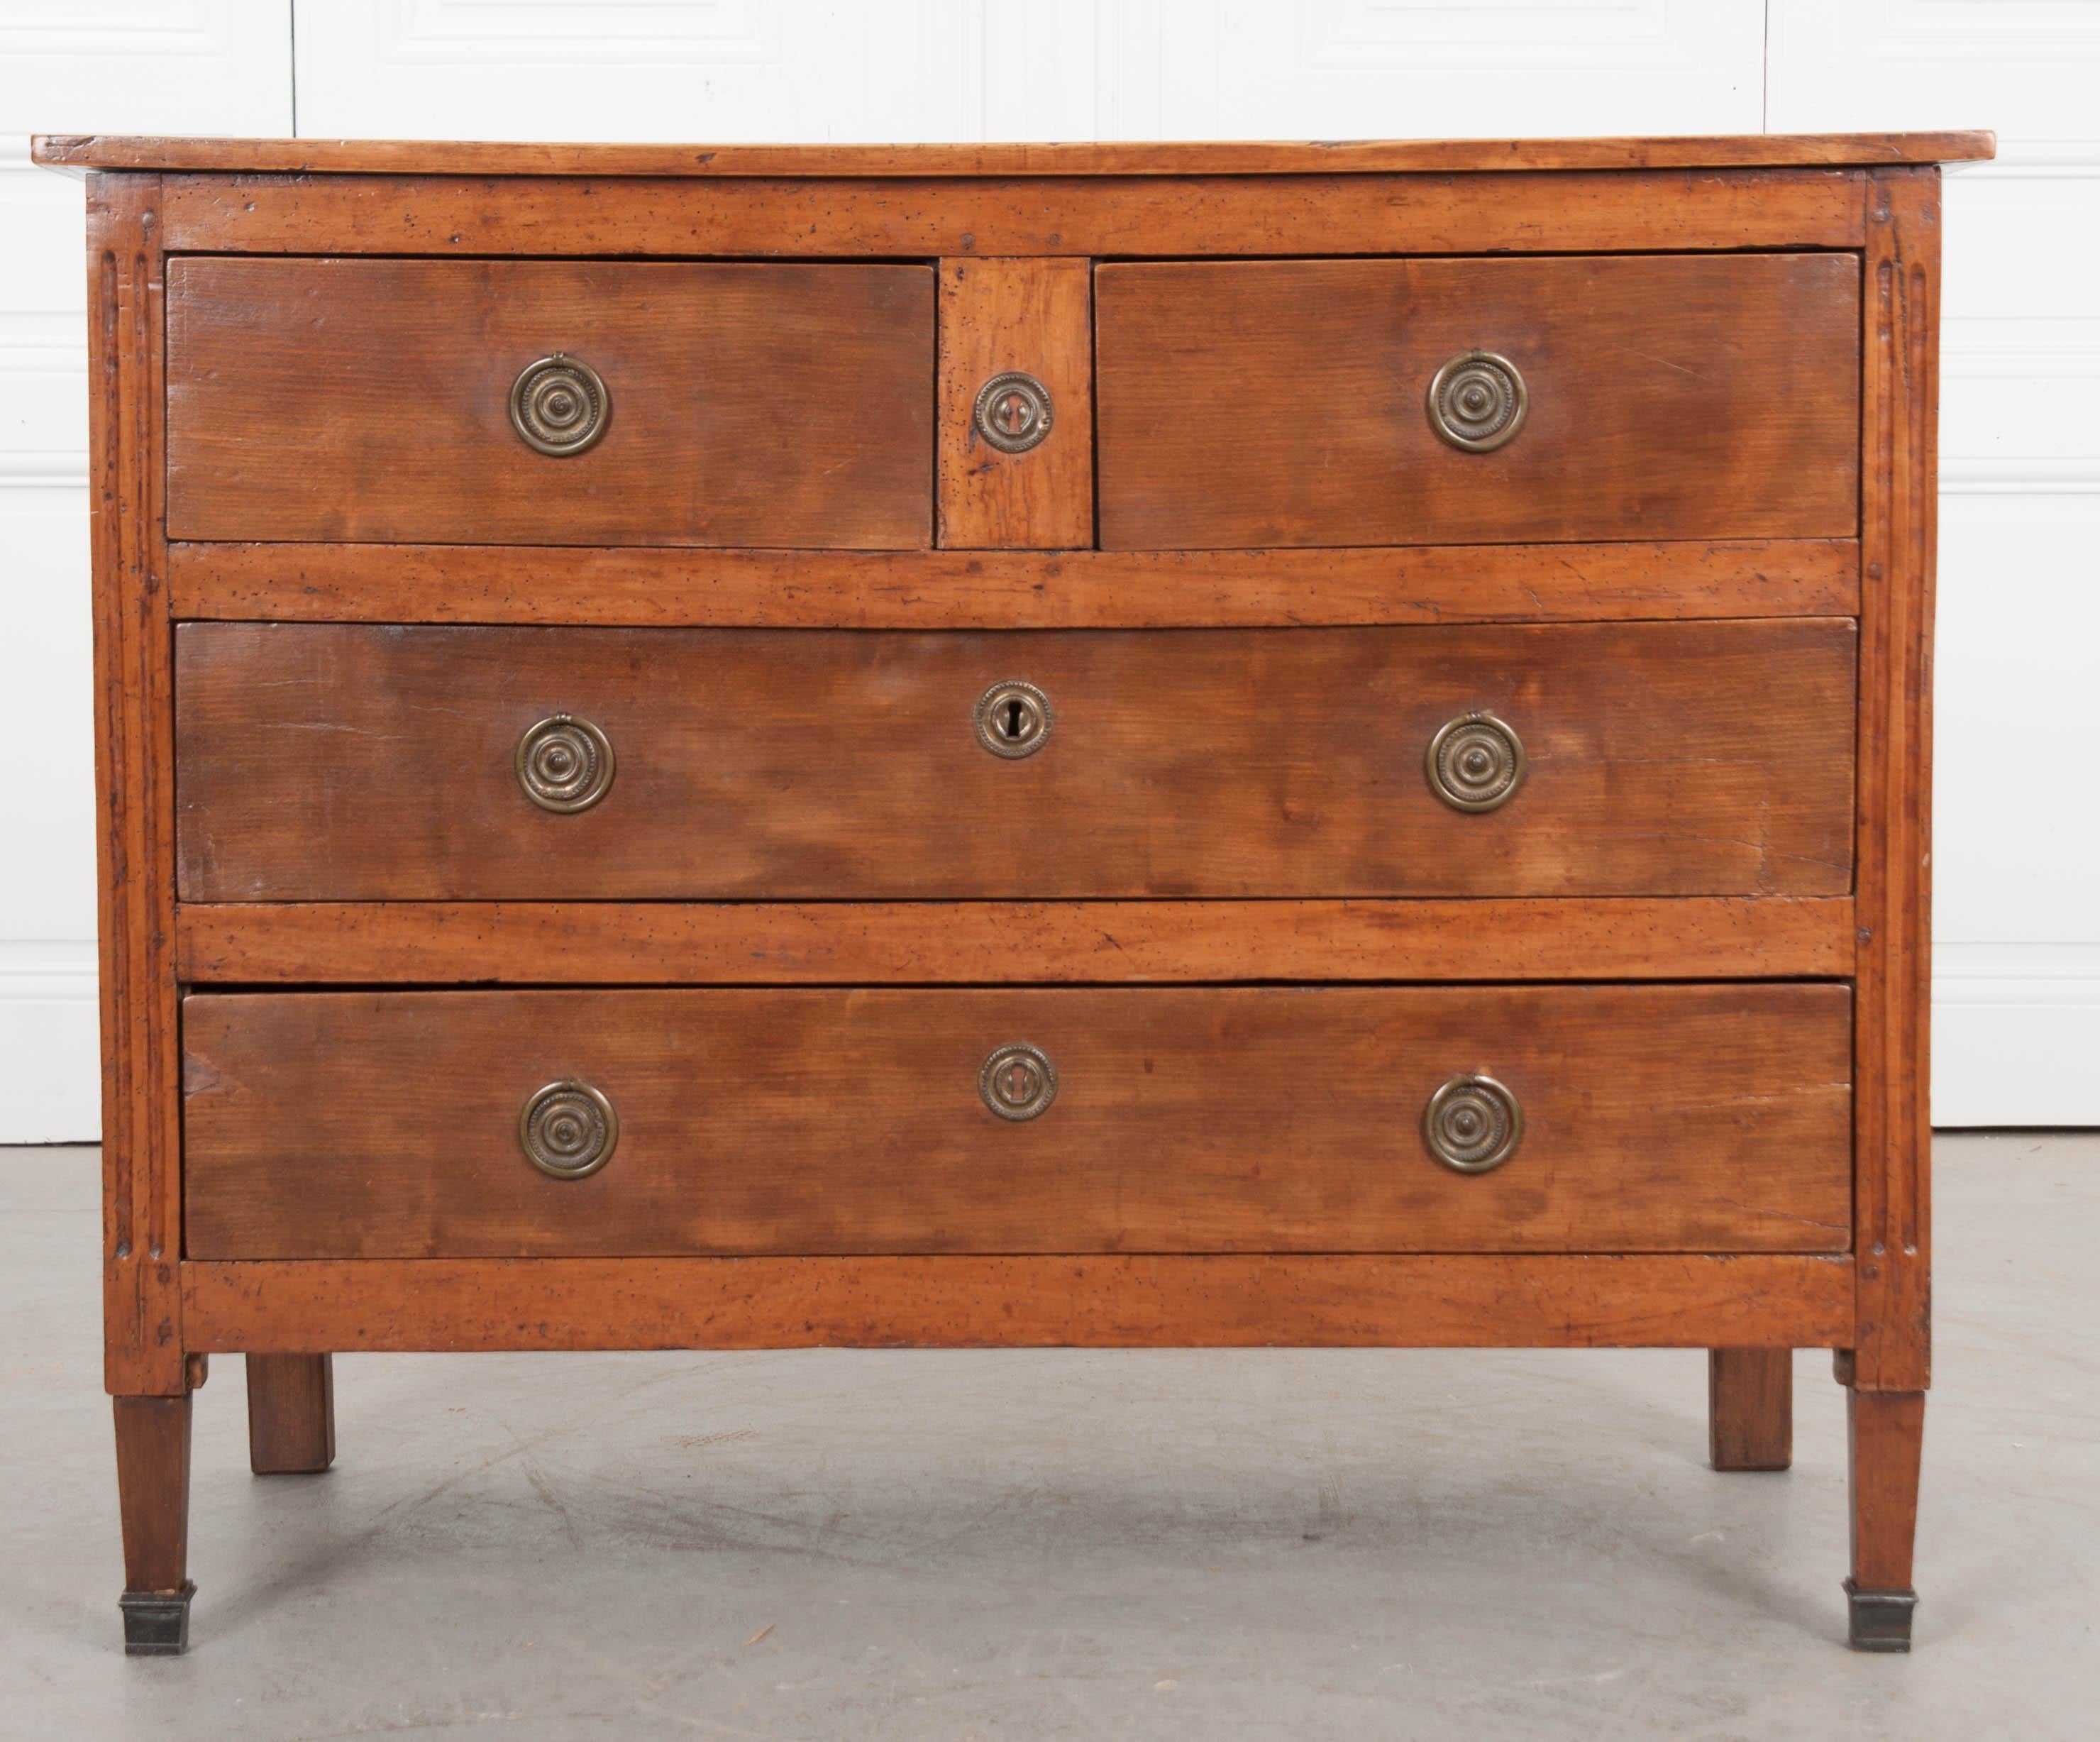 This attractively restrained French Directoire-style four-drawer commode, features two short drawers over two long drawers, and fitted with patinated-brass ring handles and escutcheons.